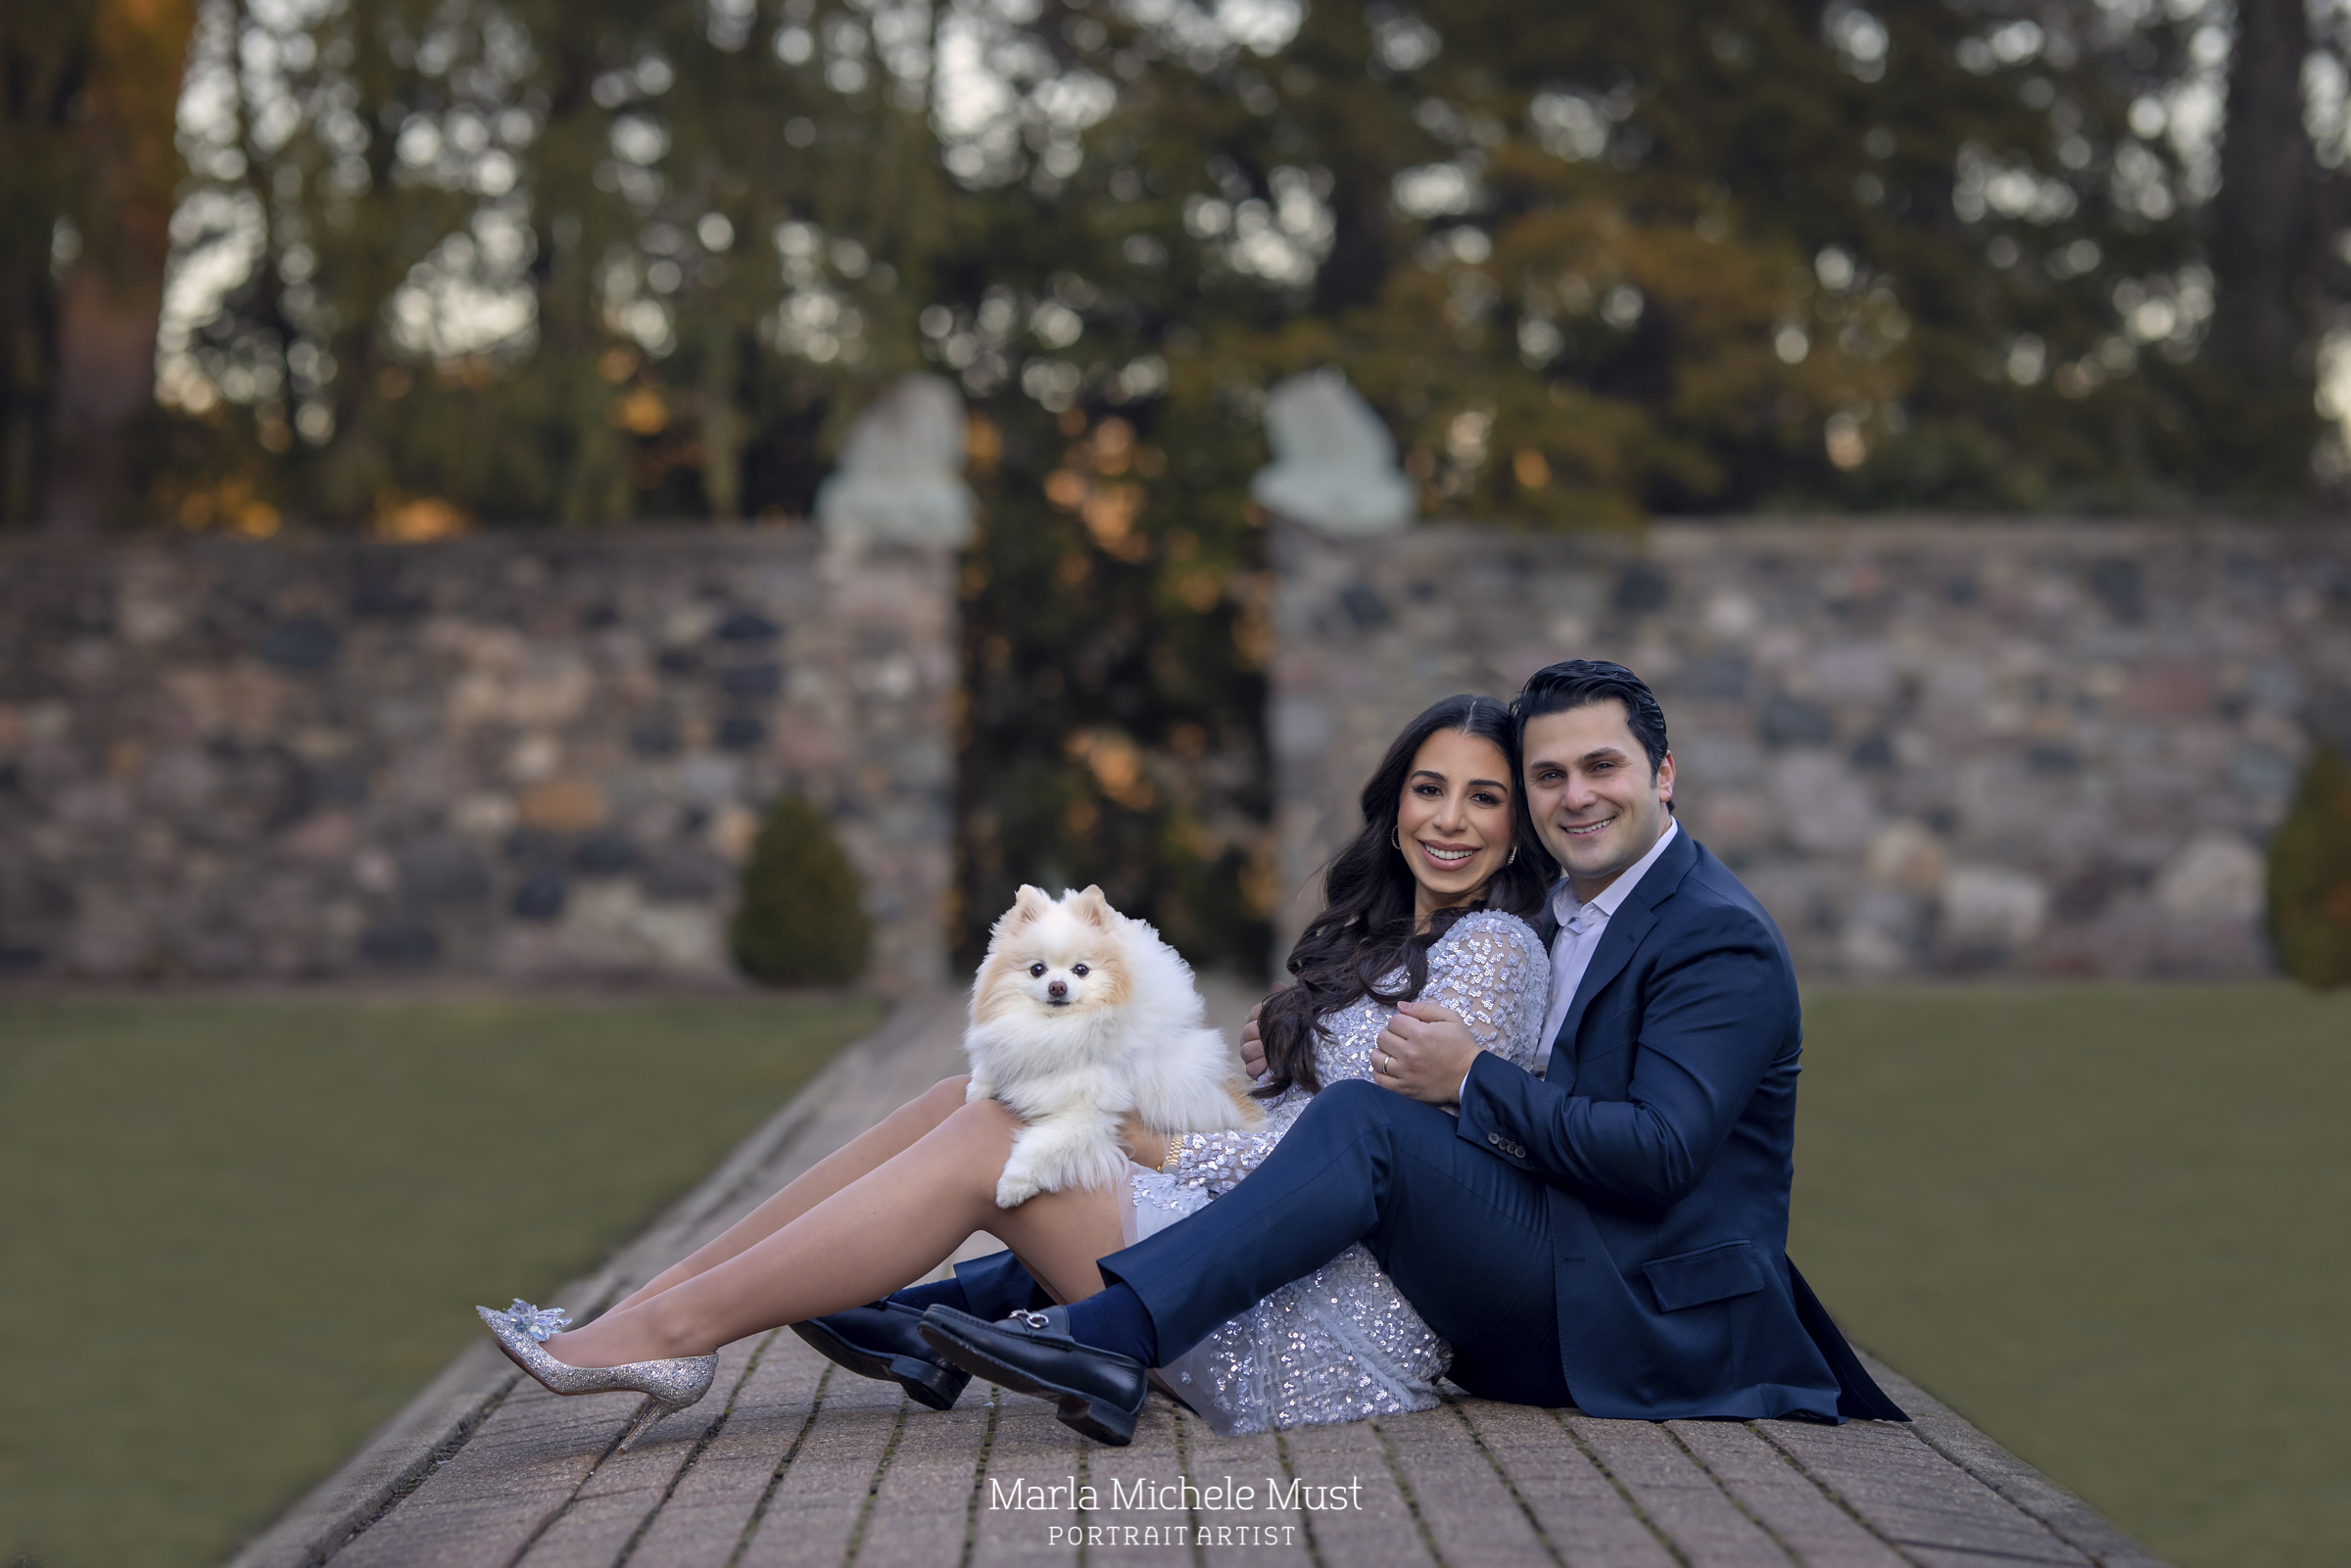 A formally dressed expecting mother, her partner, and their small dog on their lap, sit gracefully on a pathway in a Detroit park for a maternity photoshoot; a moment captured by a talented Michigan maternity photographer.